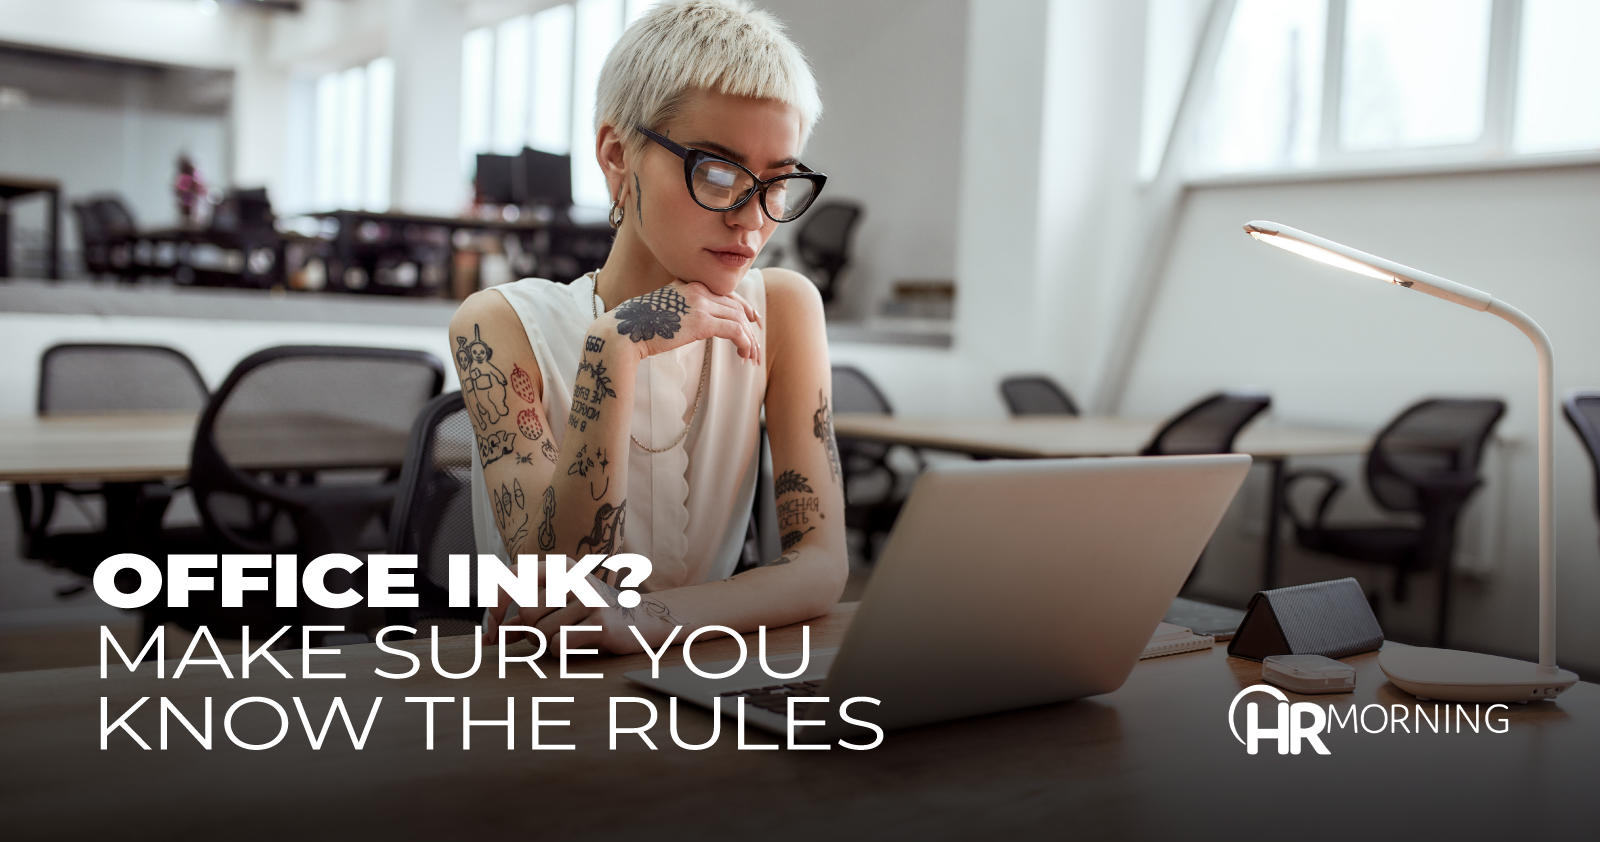 Office Ink? Make sure you know the rules